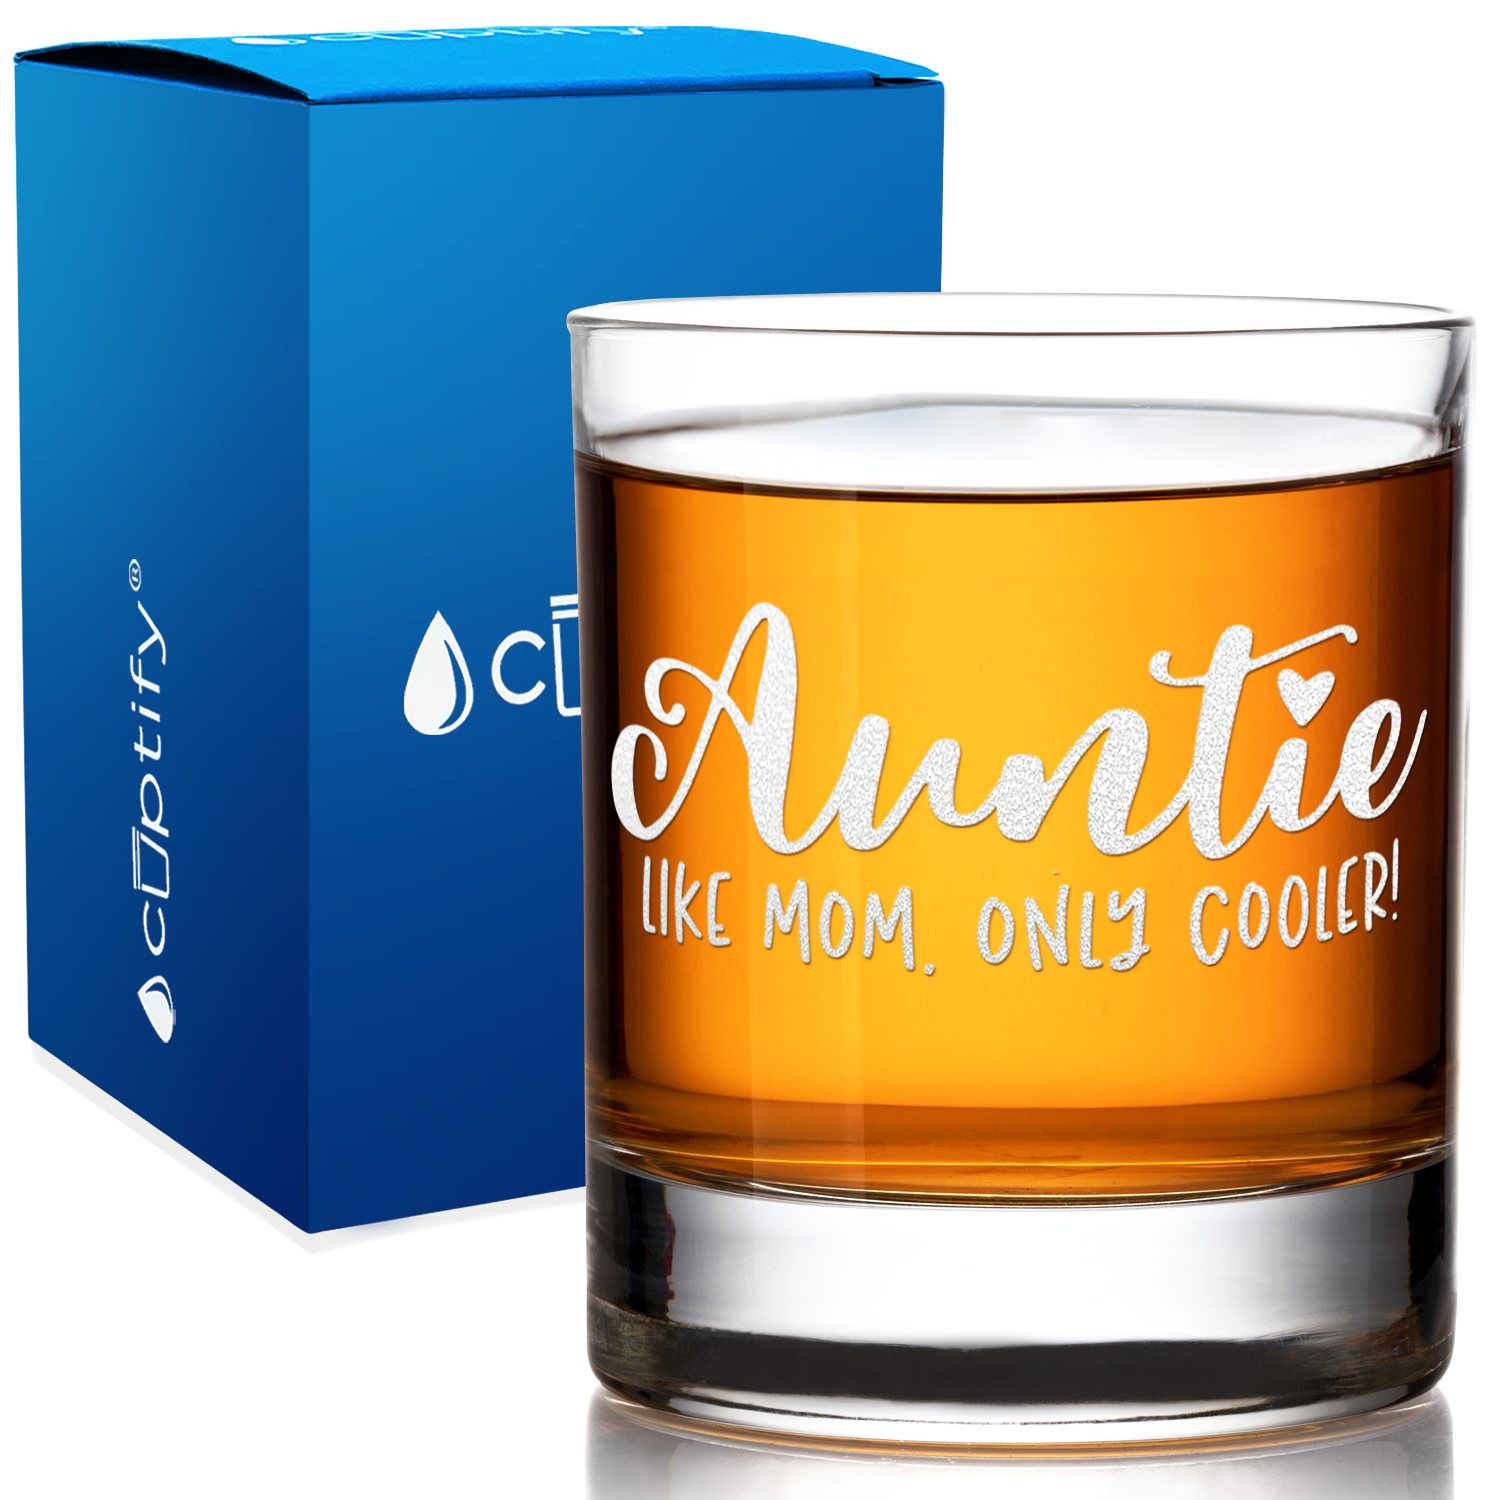 Auntie Like Mom, Only Cooler! Etched 10.25 oz Old Fashioned Glass